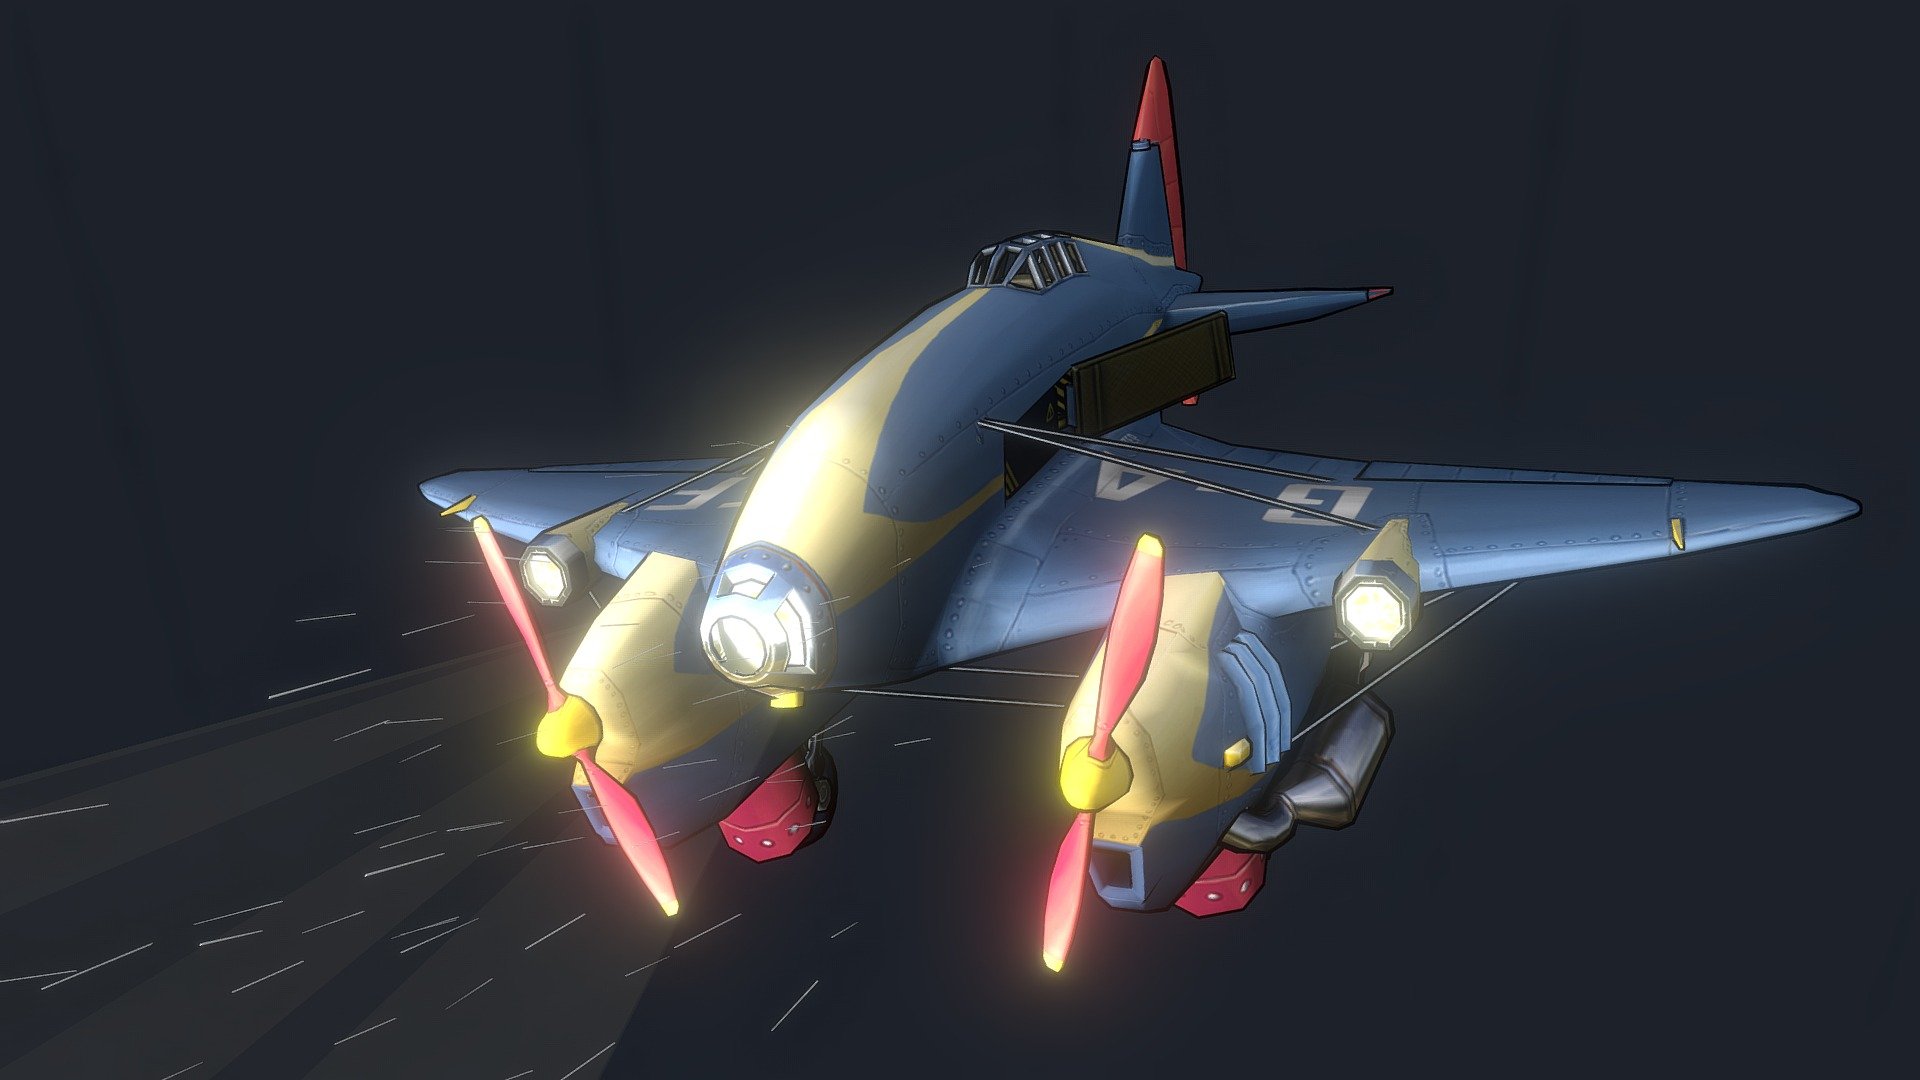 Stylized plane based on the comet 88 model. project for DAE.
All textures and models hand drawn and animated 3d model